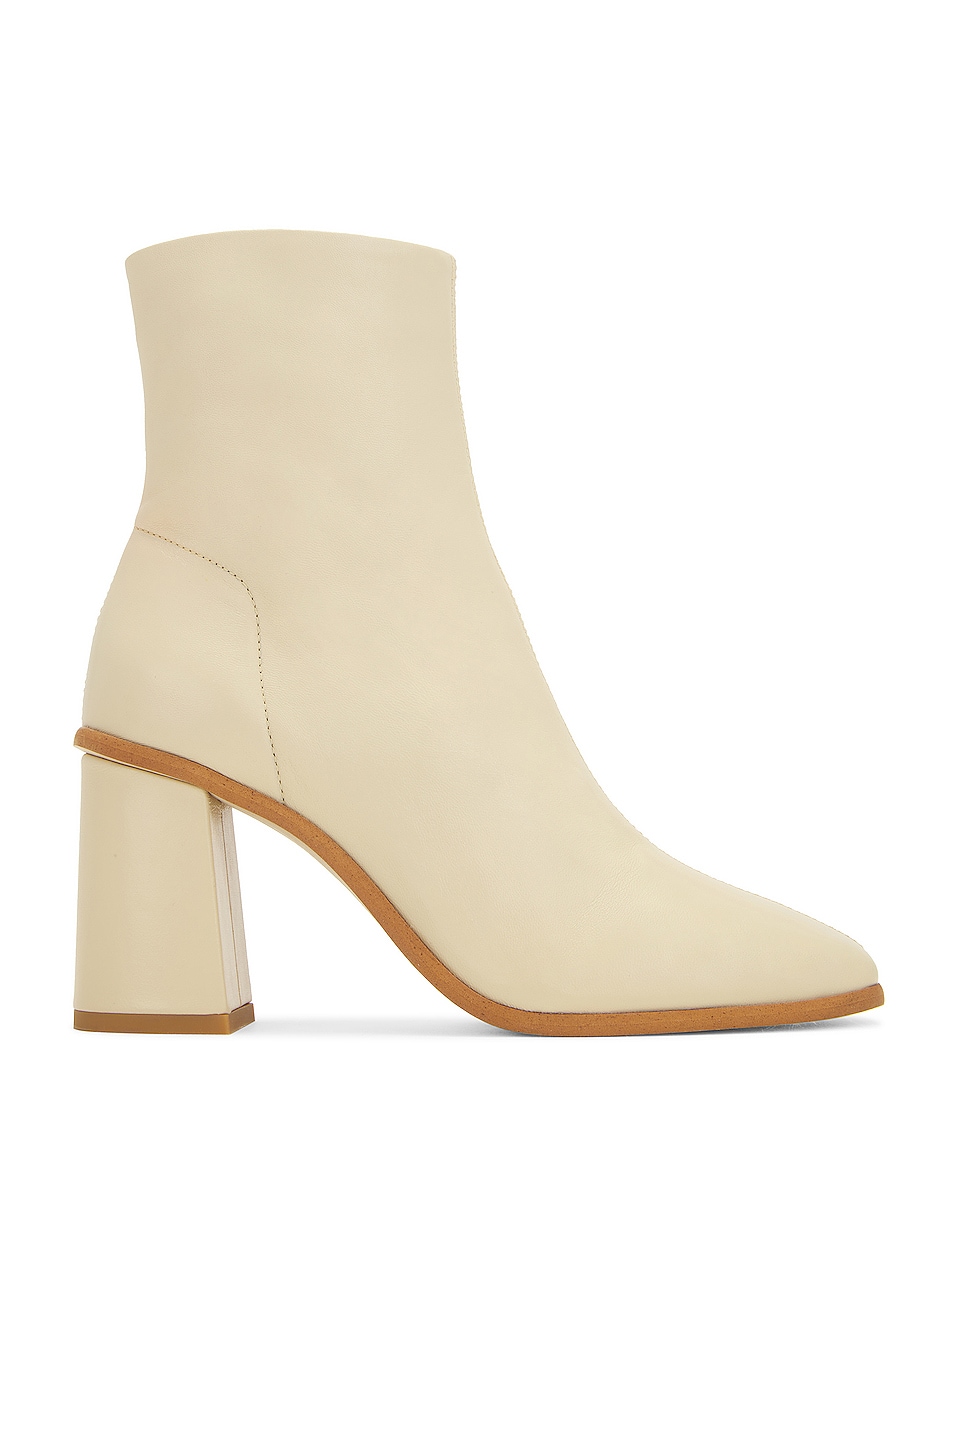 Free People Sienna Ankle Boot in Buttercream | REVOLVE